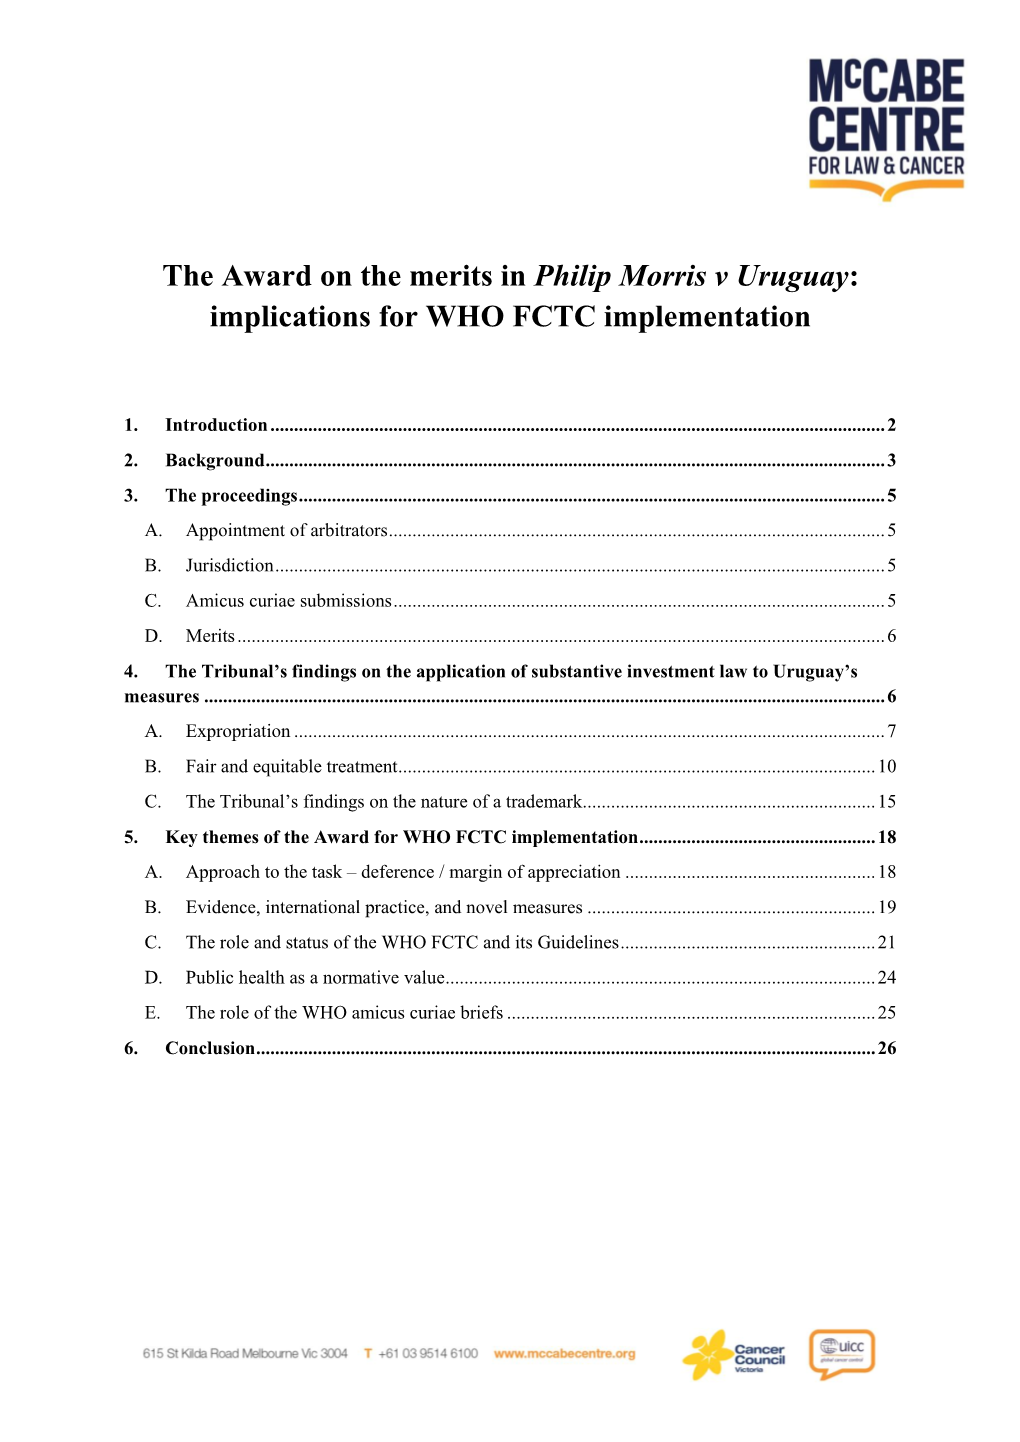 The Award on the Merits in Philip Morris V Uruguay: Implications for WHO FCTC Implementation